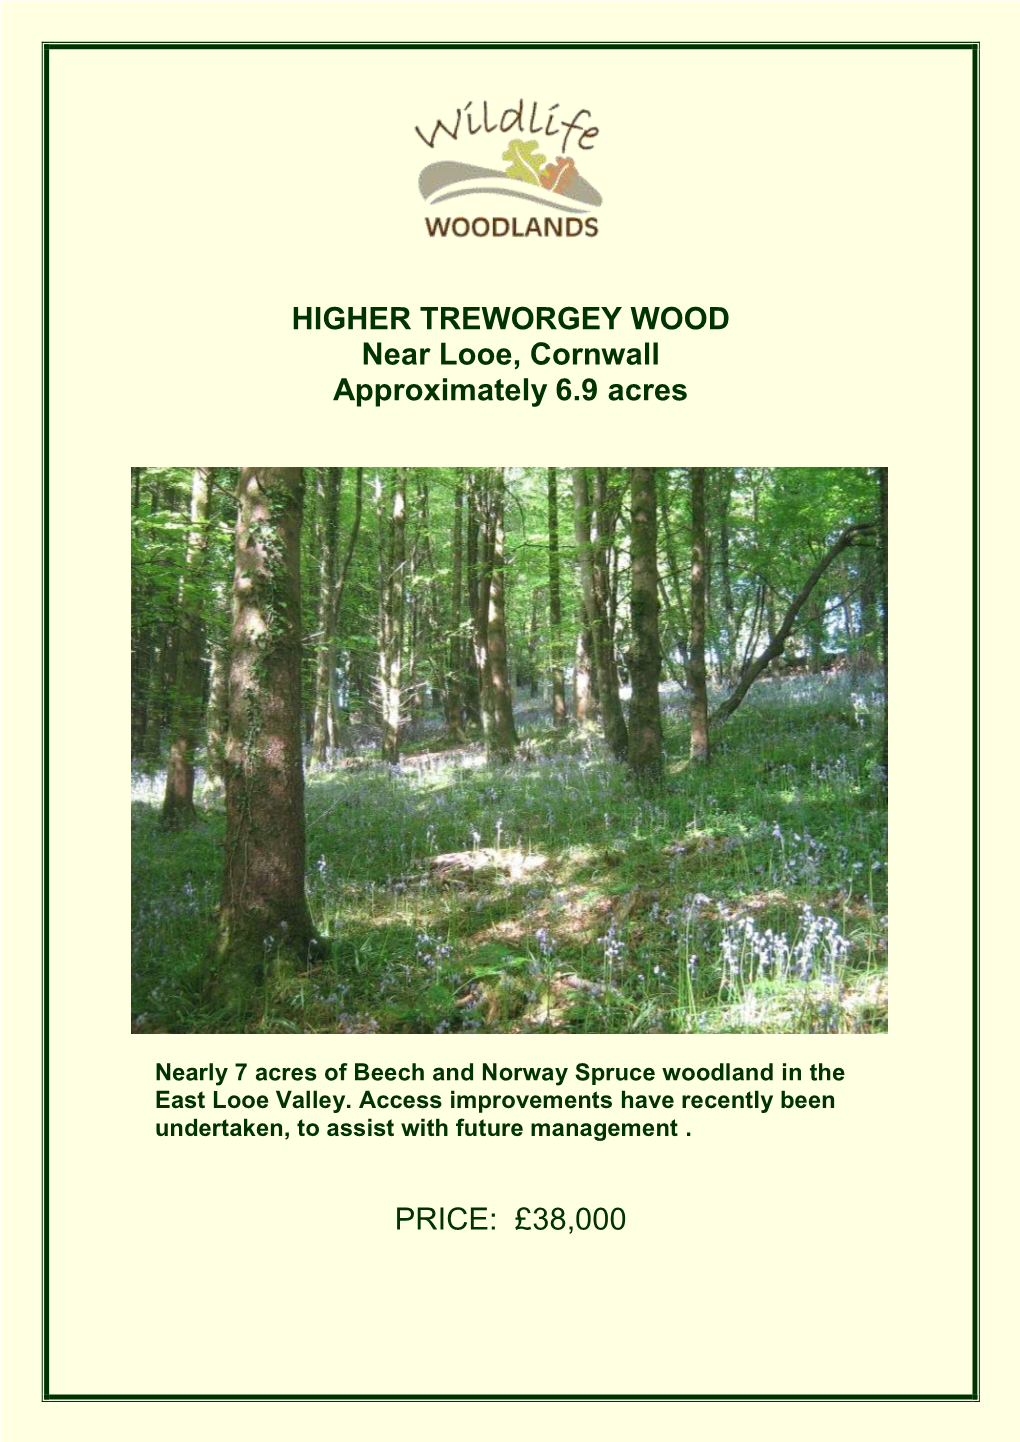 HIGHER TREWORGEY WOOD Near Looe, Cornwall Approximately 6.9 Acres